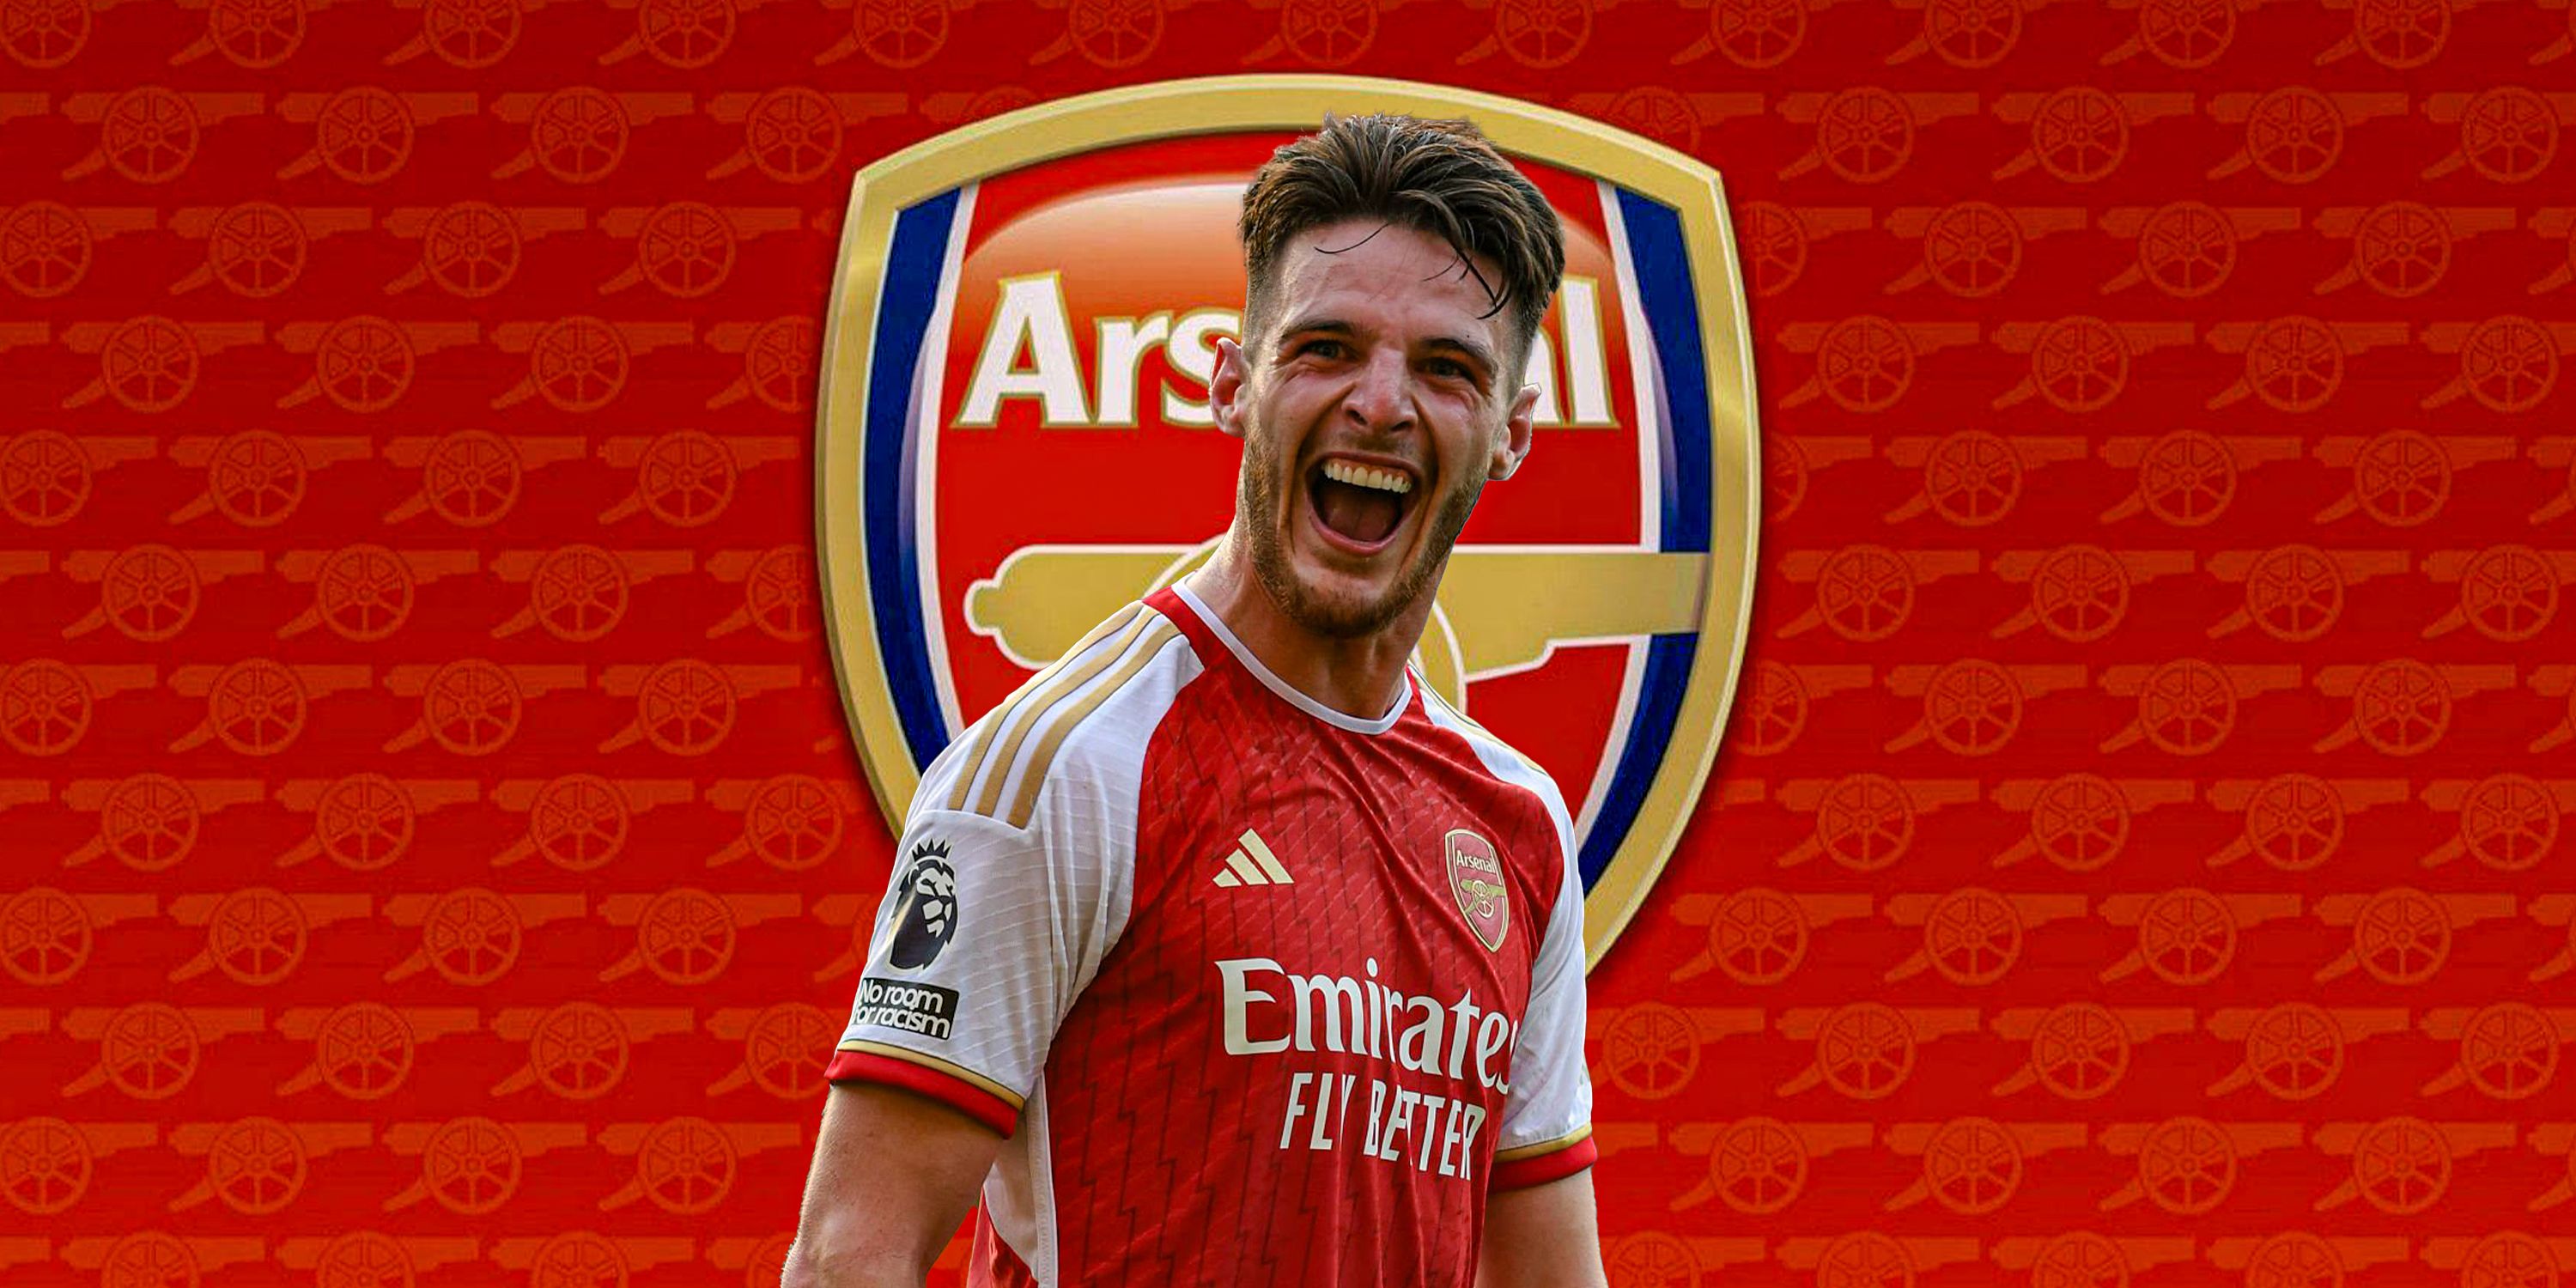 Declan Rice celebrating/happy in Arsenal red kit with  Arsenal bade/theme